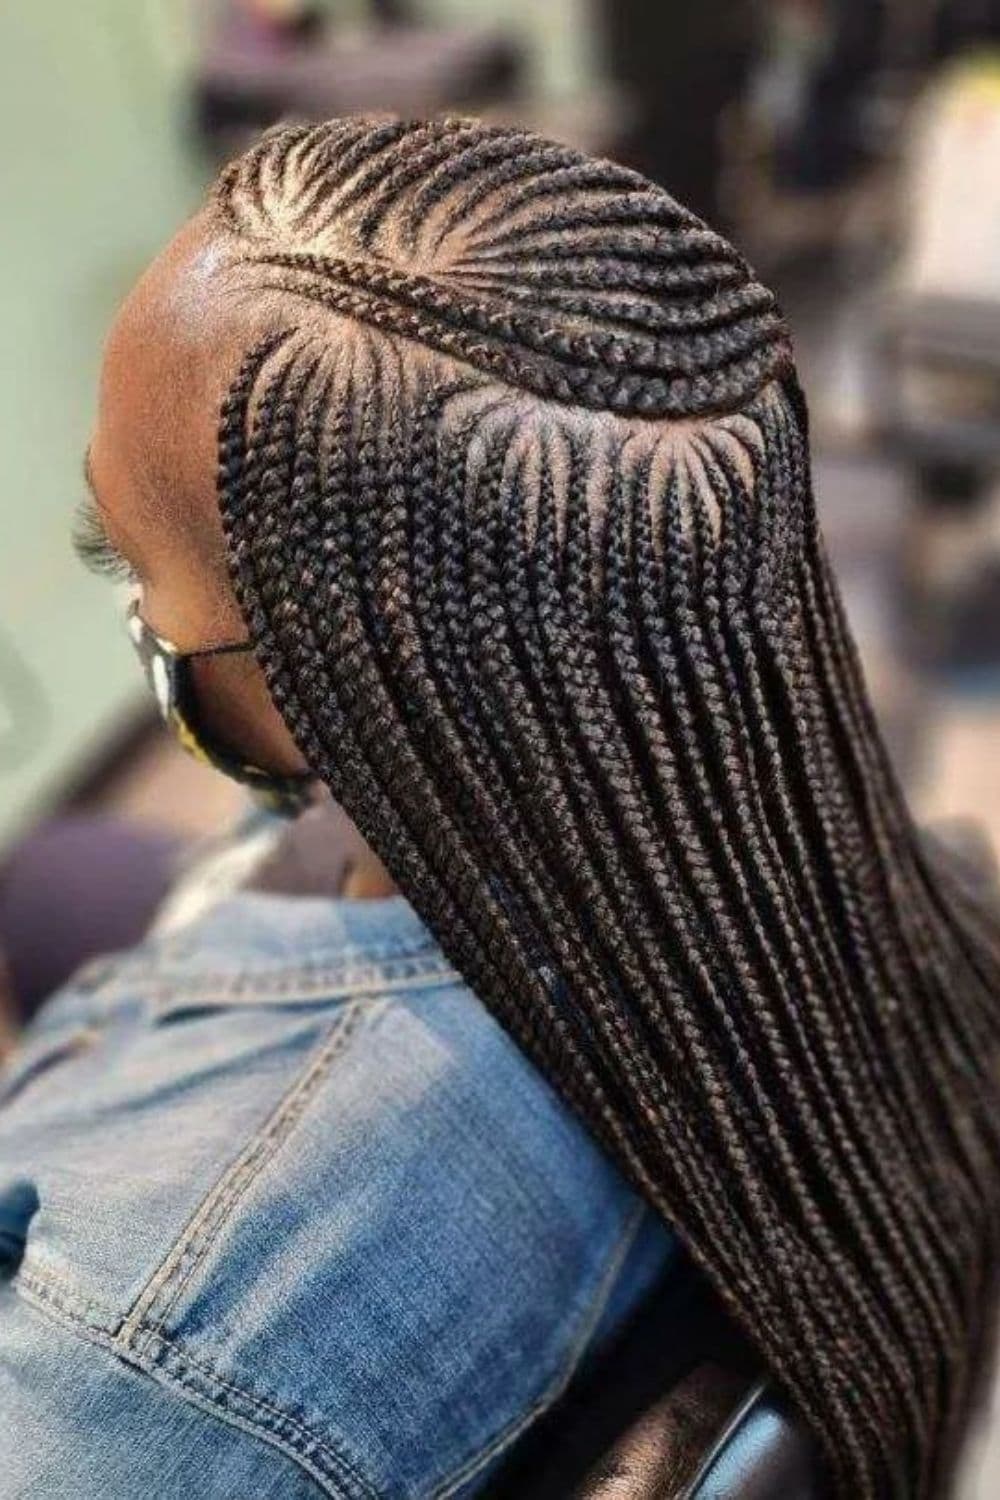 Close-up shot of a woman's micro cornrows hairstyle.